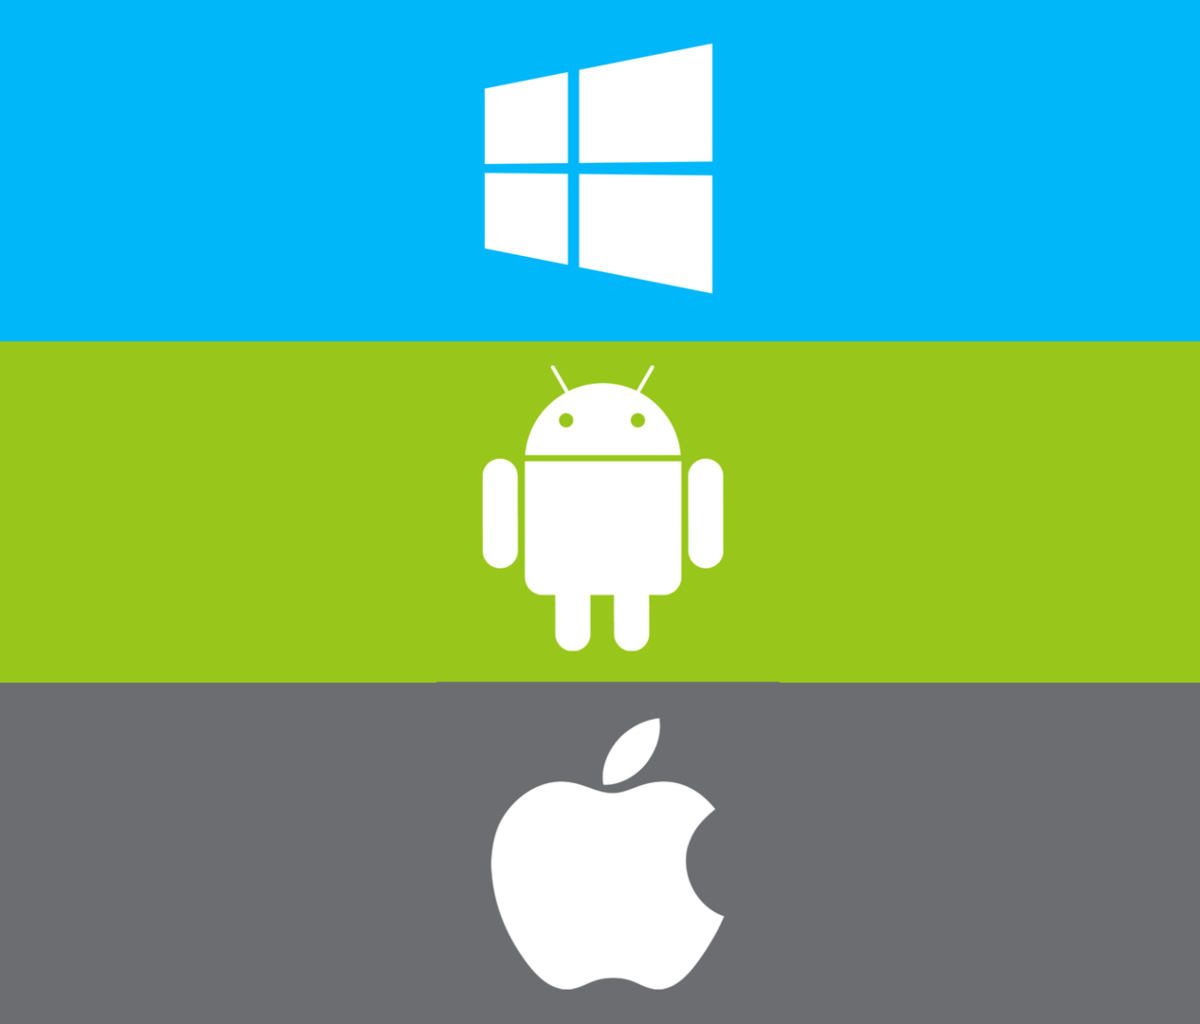 Windows, Apple, Android - What's Your Choice? screenshot #1 1200x1024